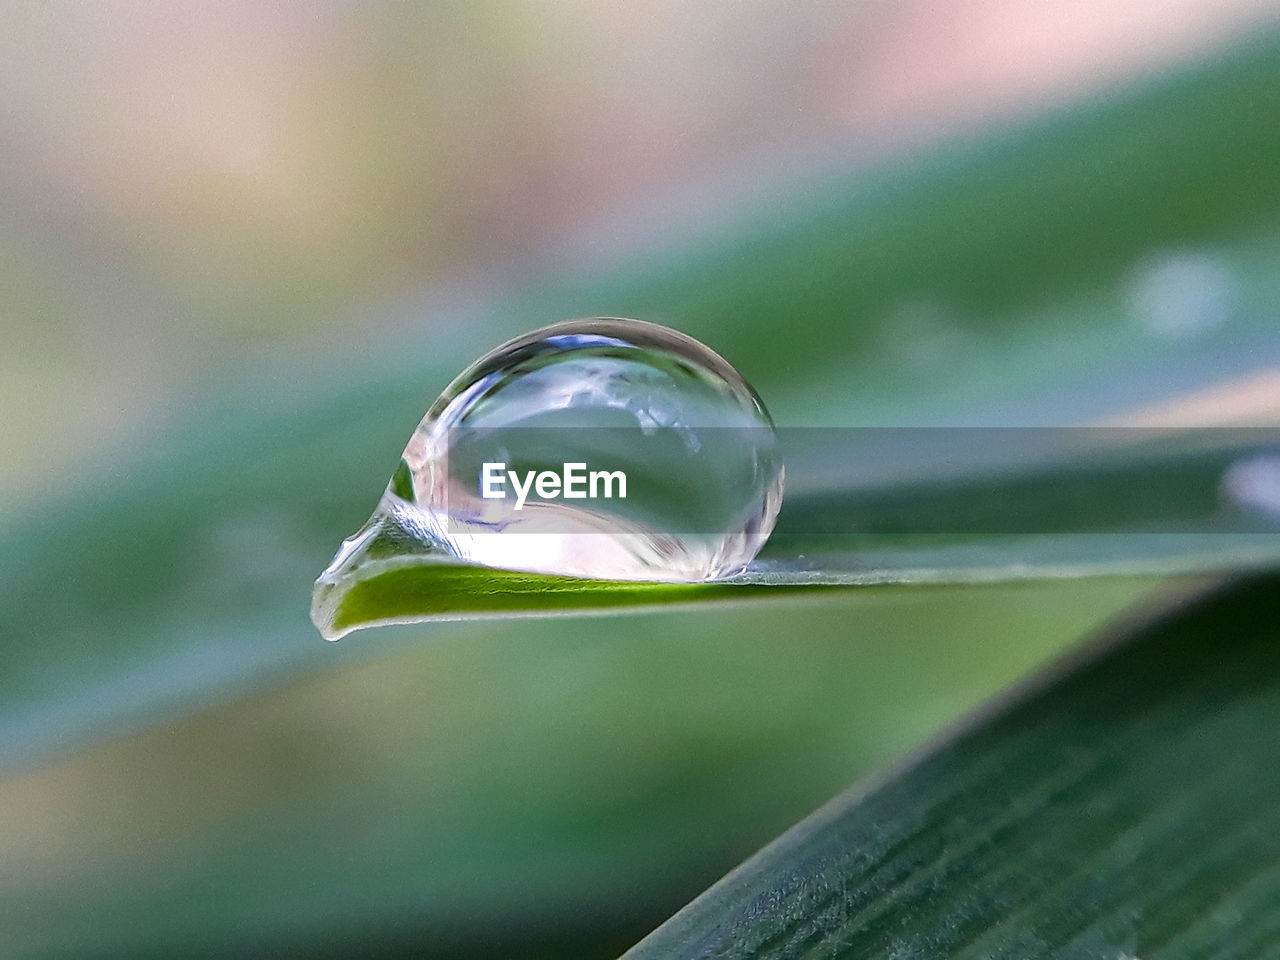 CLOSE-UP OF DEW DROP ON GLASS